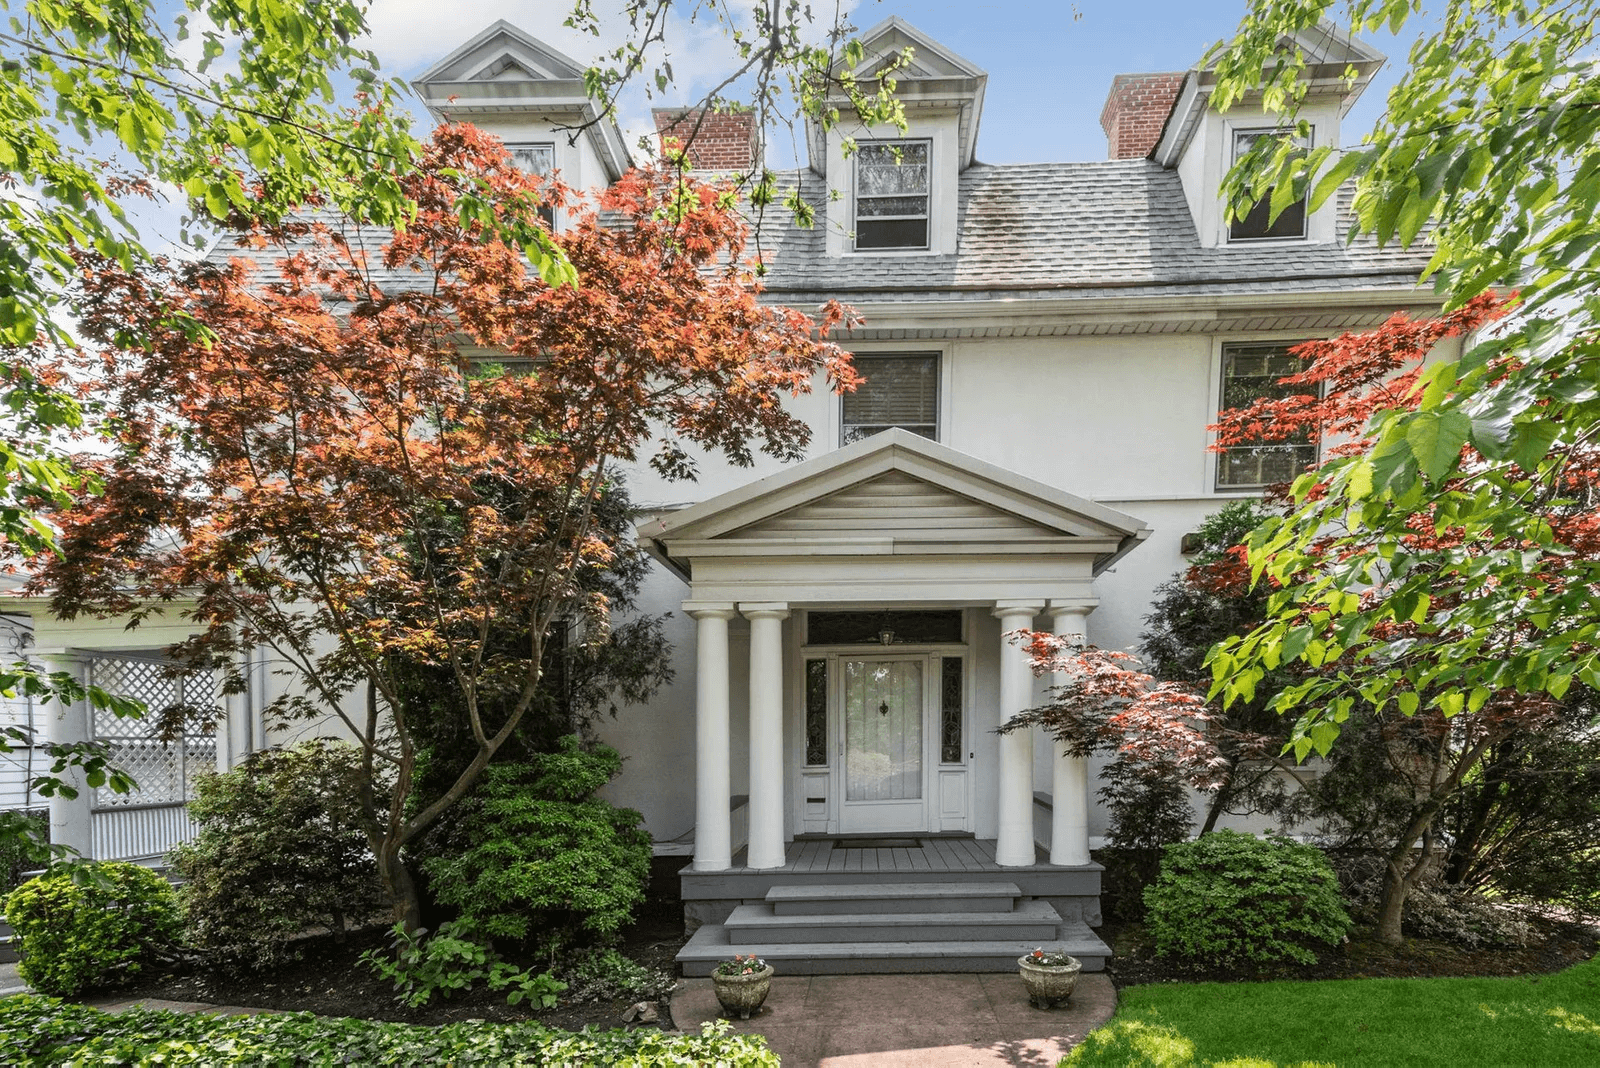 exterior of 1144 84th street